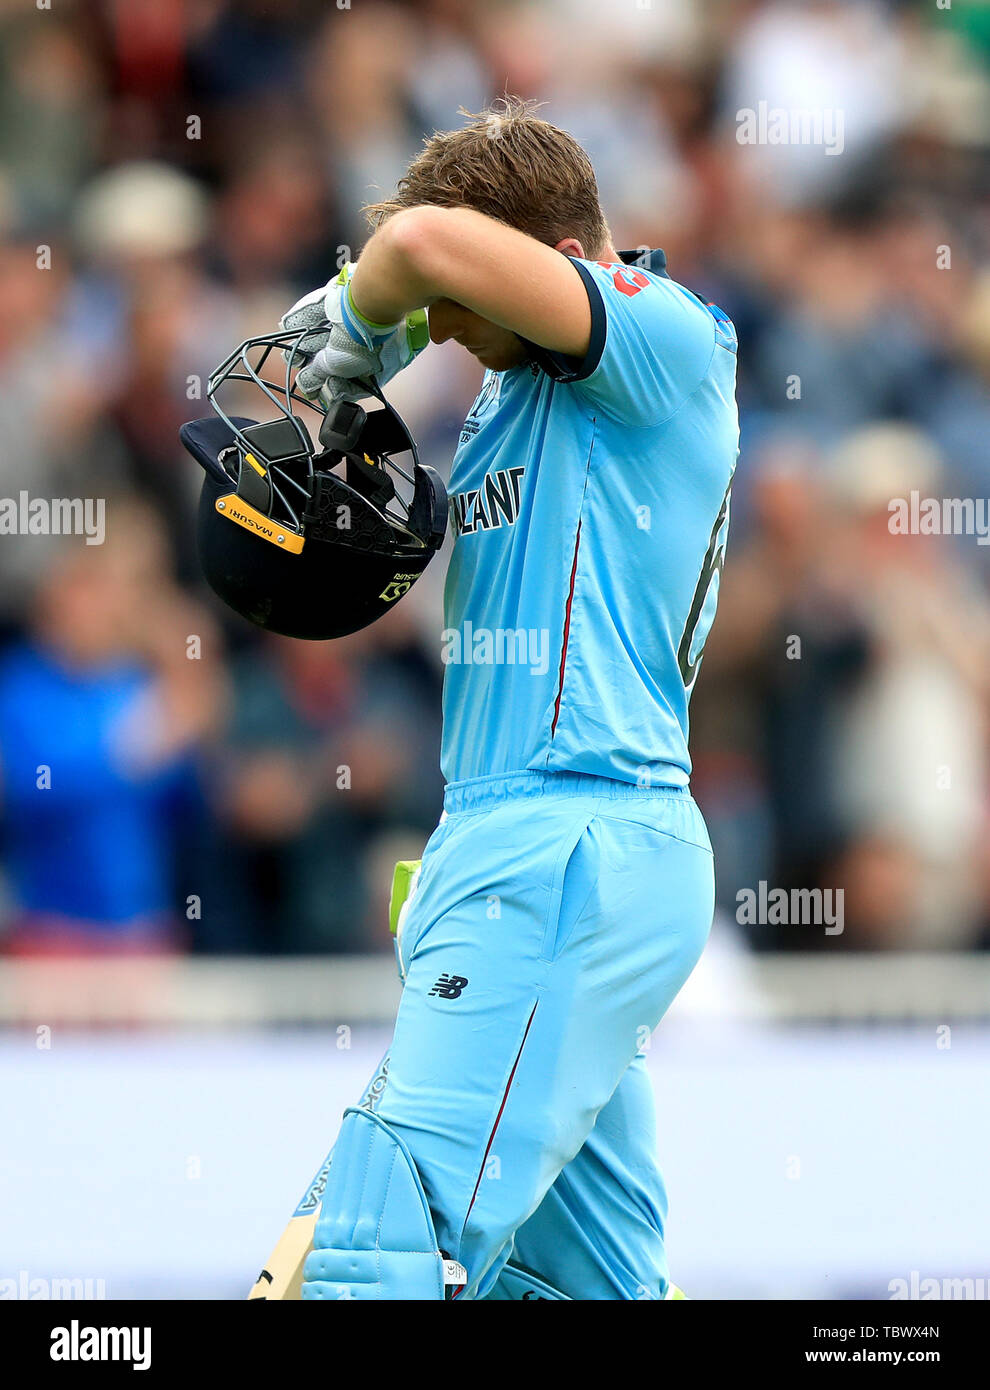 England's Jos Buttler appears dejected after being dismissed during the ICC Cricket World Cup group stage match at Trent Bridge, Nottingham. Stock Photo